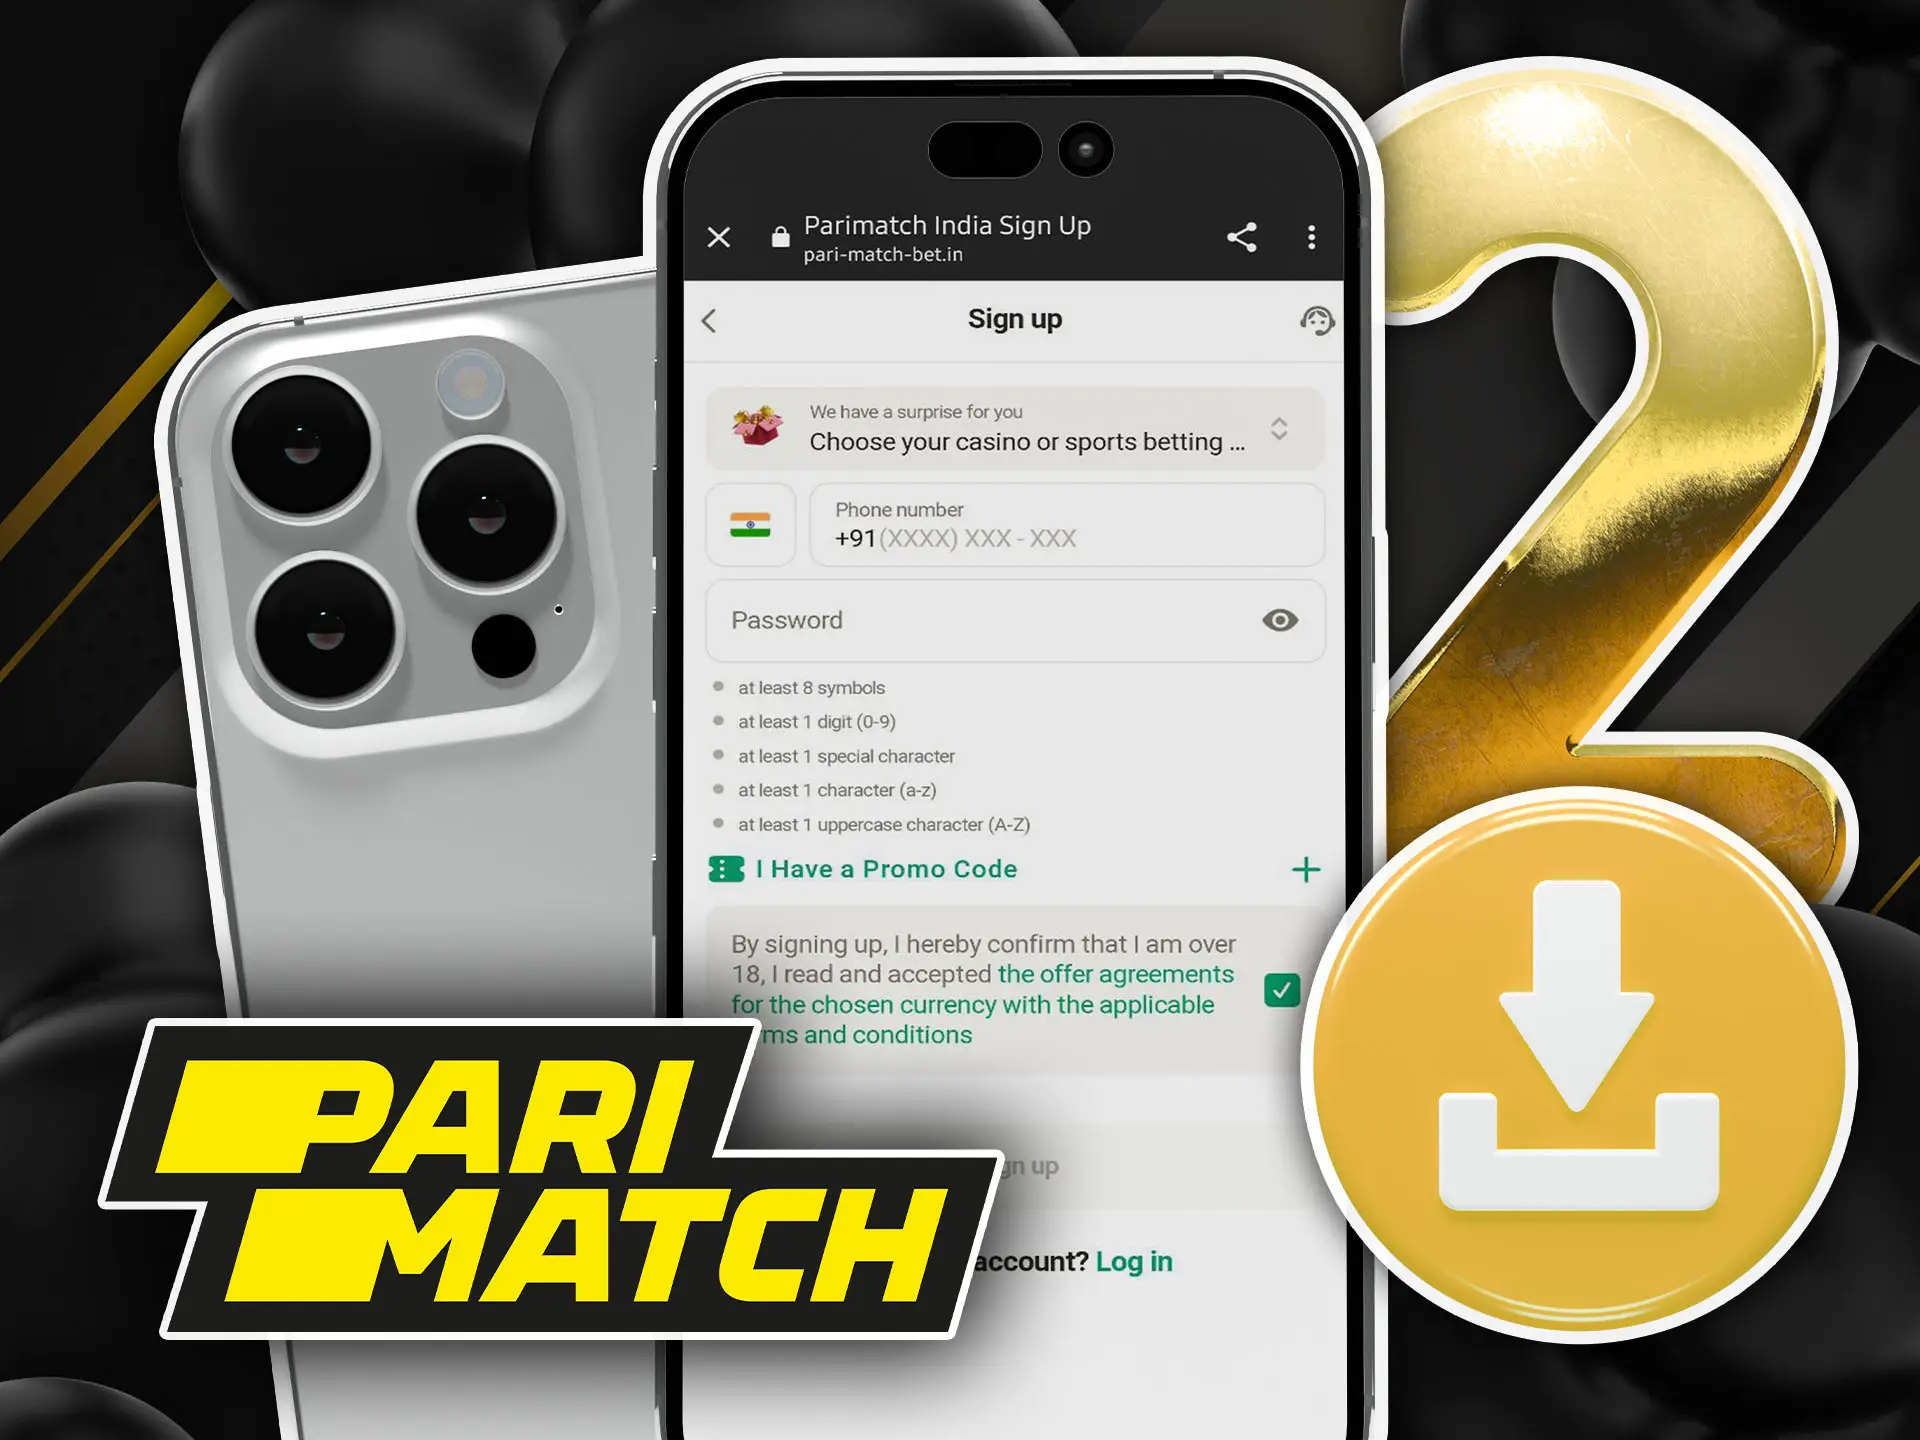 Register to install the IOS app in Parimatch for India.